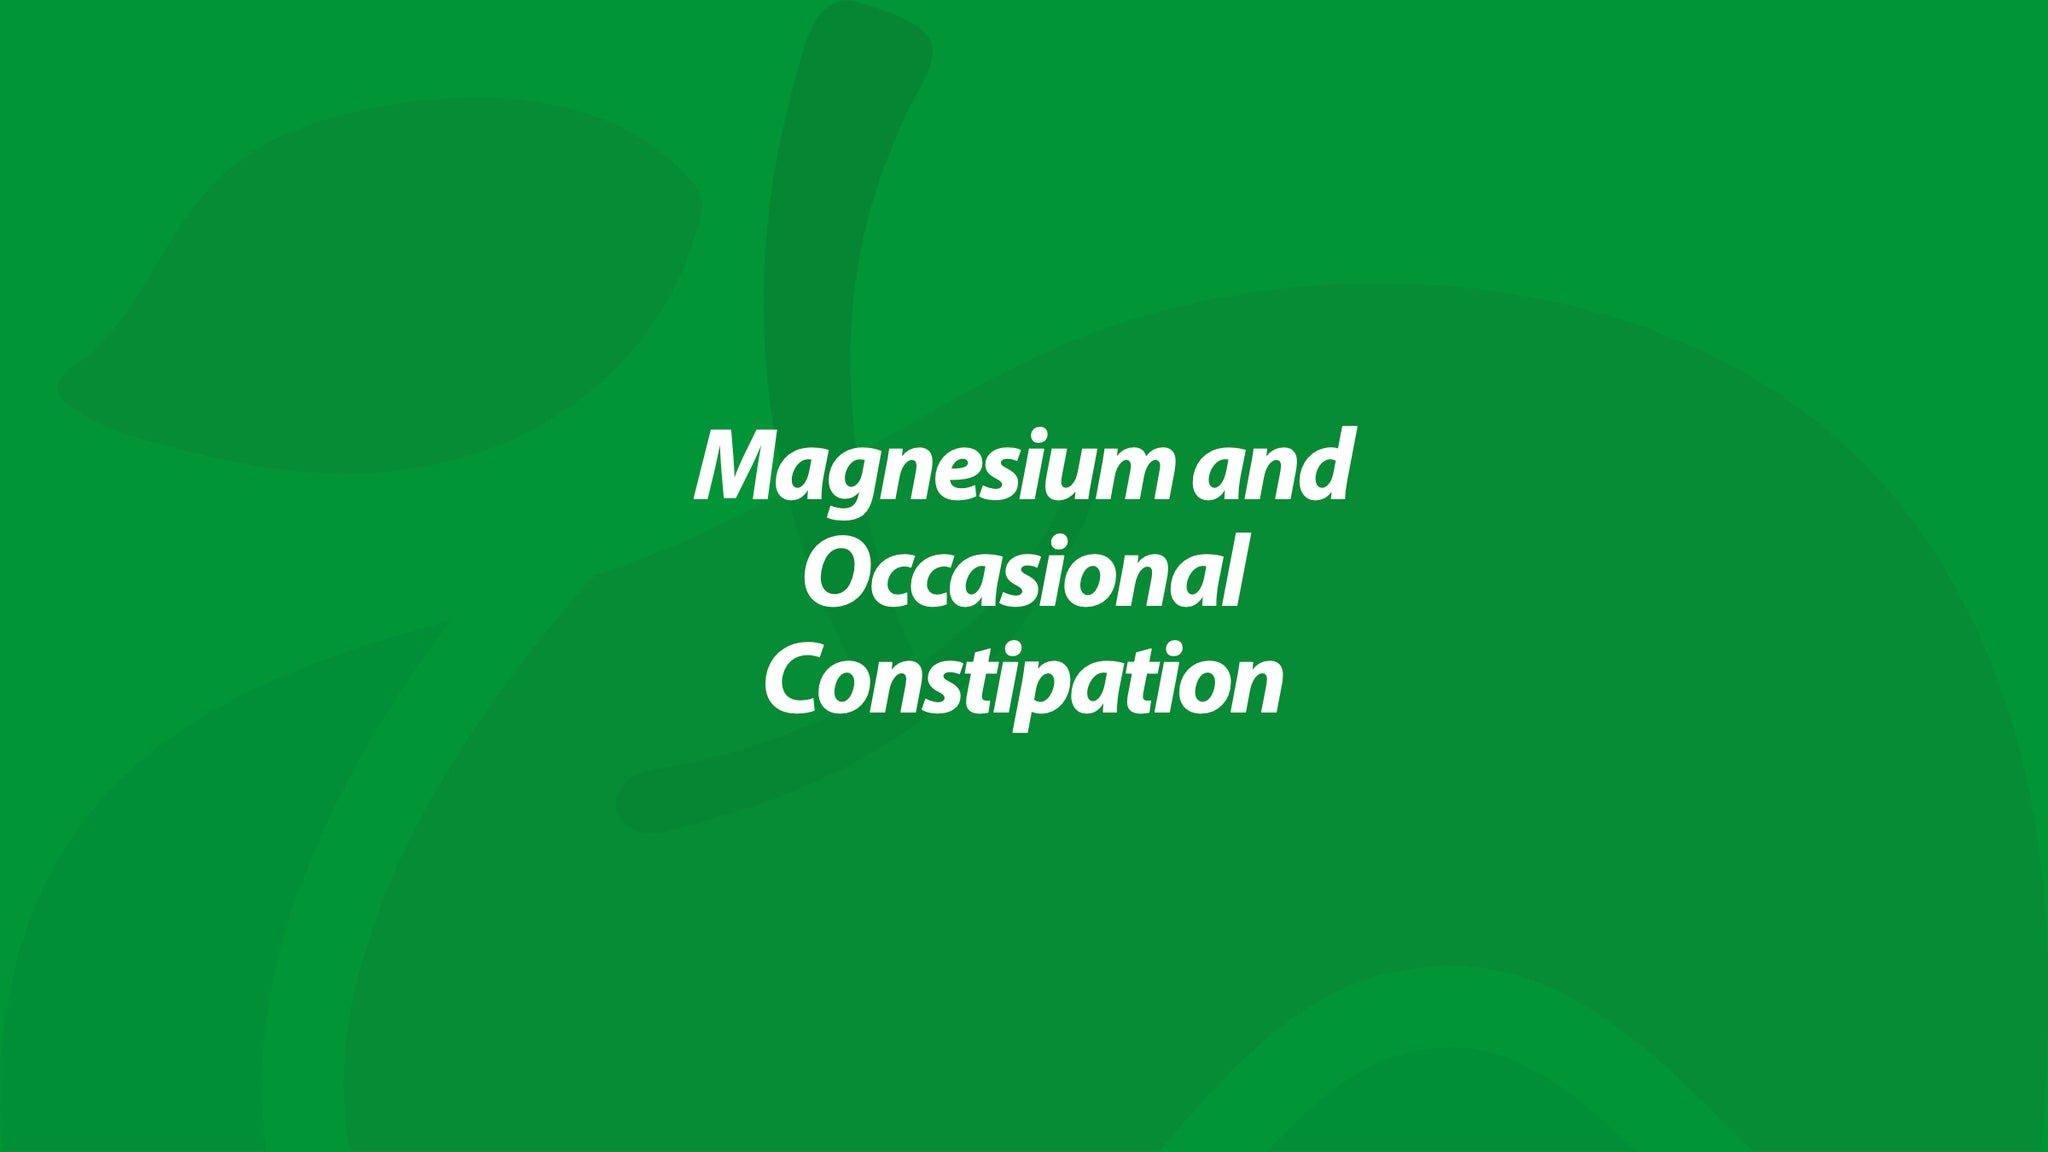 Magnesium and Occasional Constipation